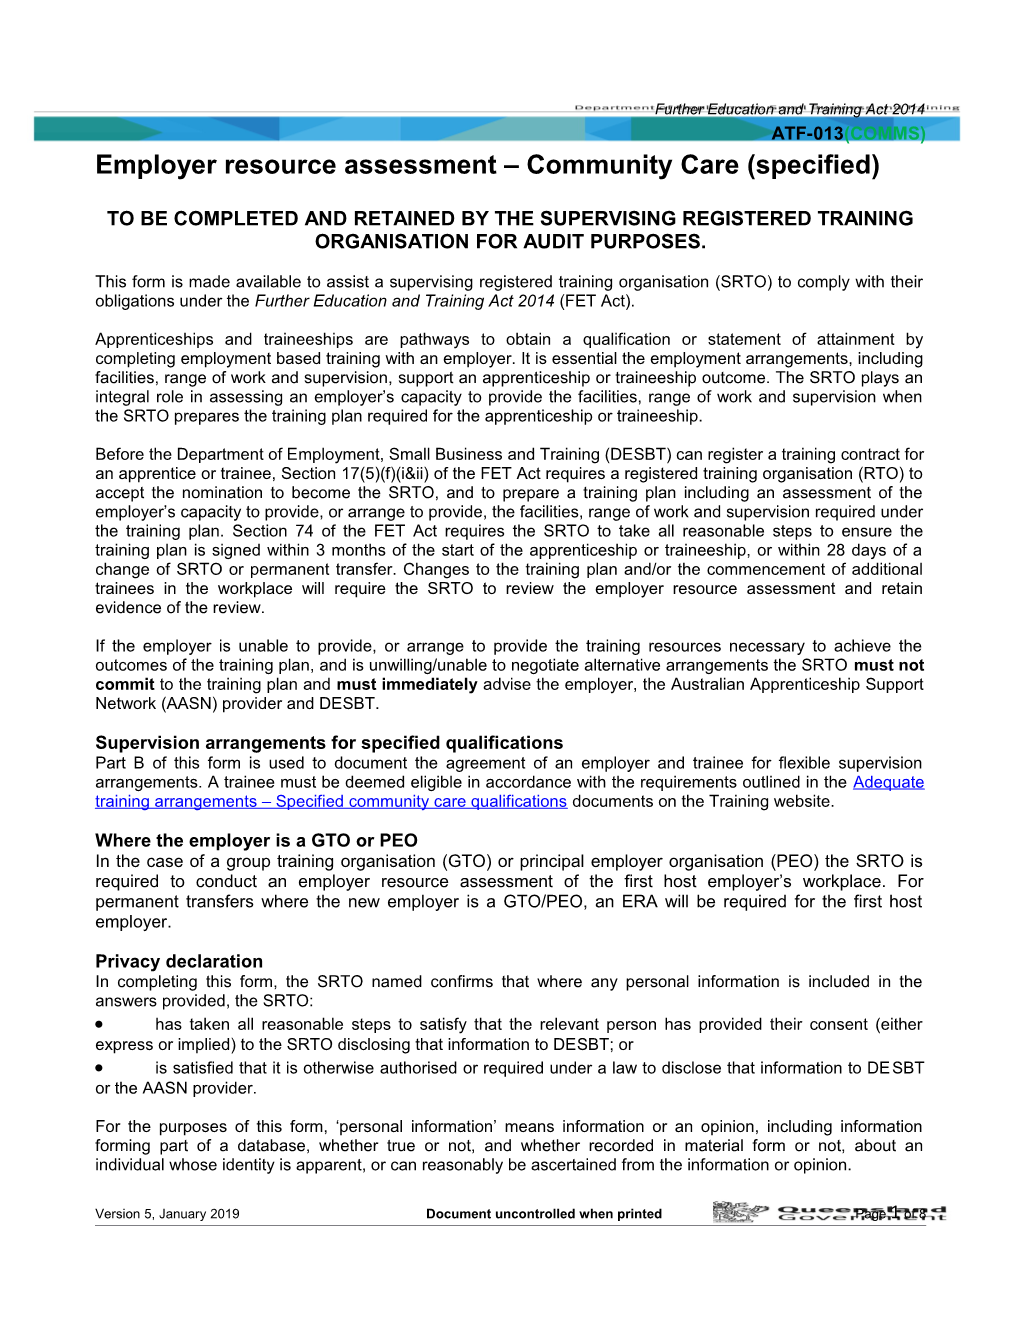 ATF-013(COMMS) Employer Resource Assessment - Community Care (Specified)